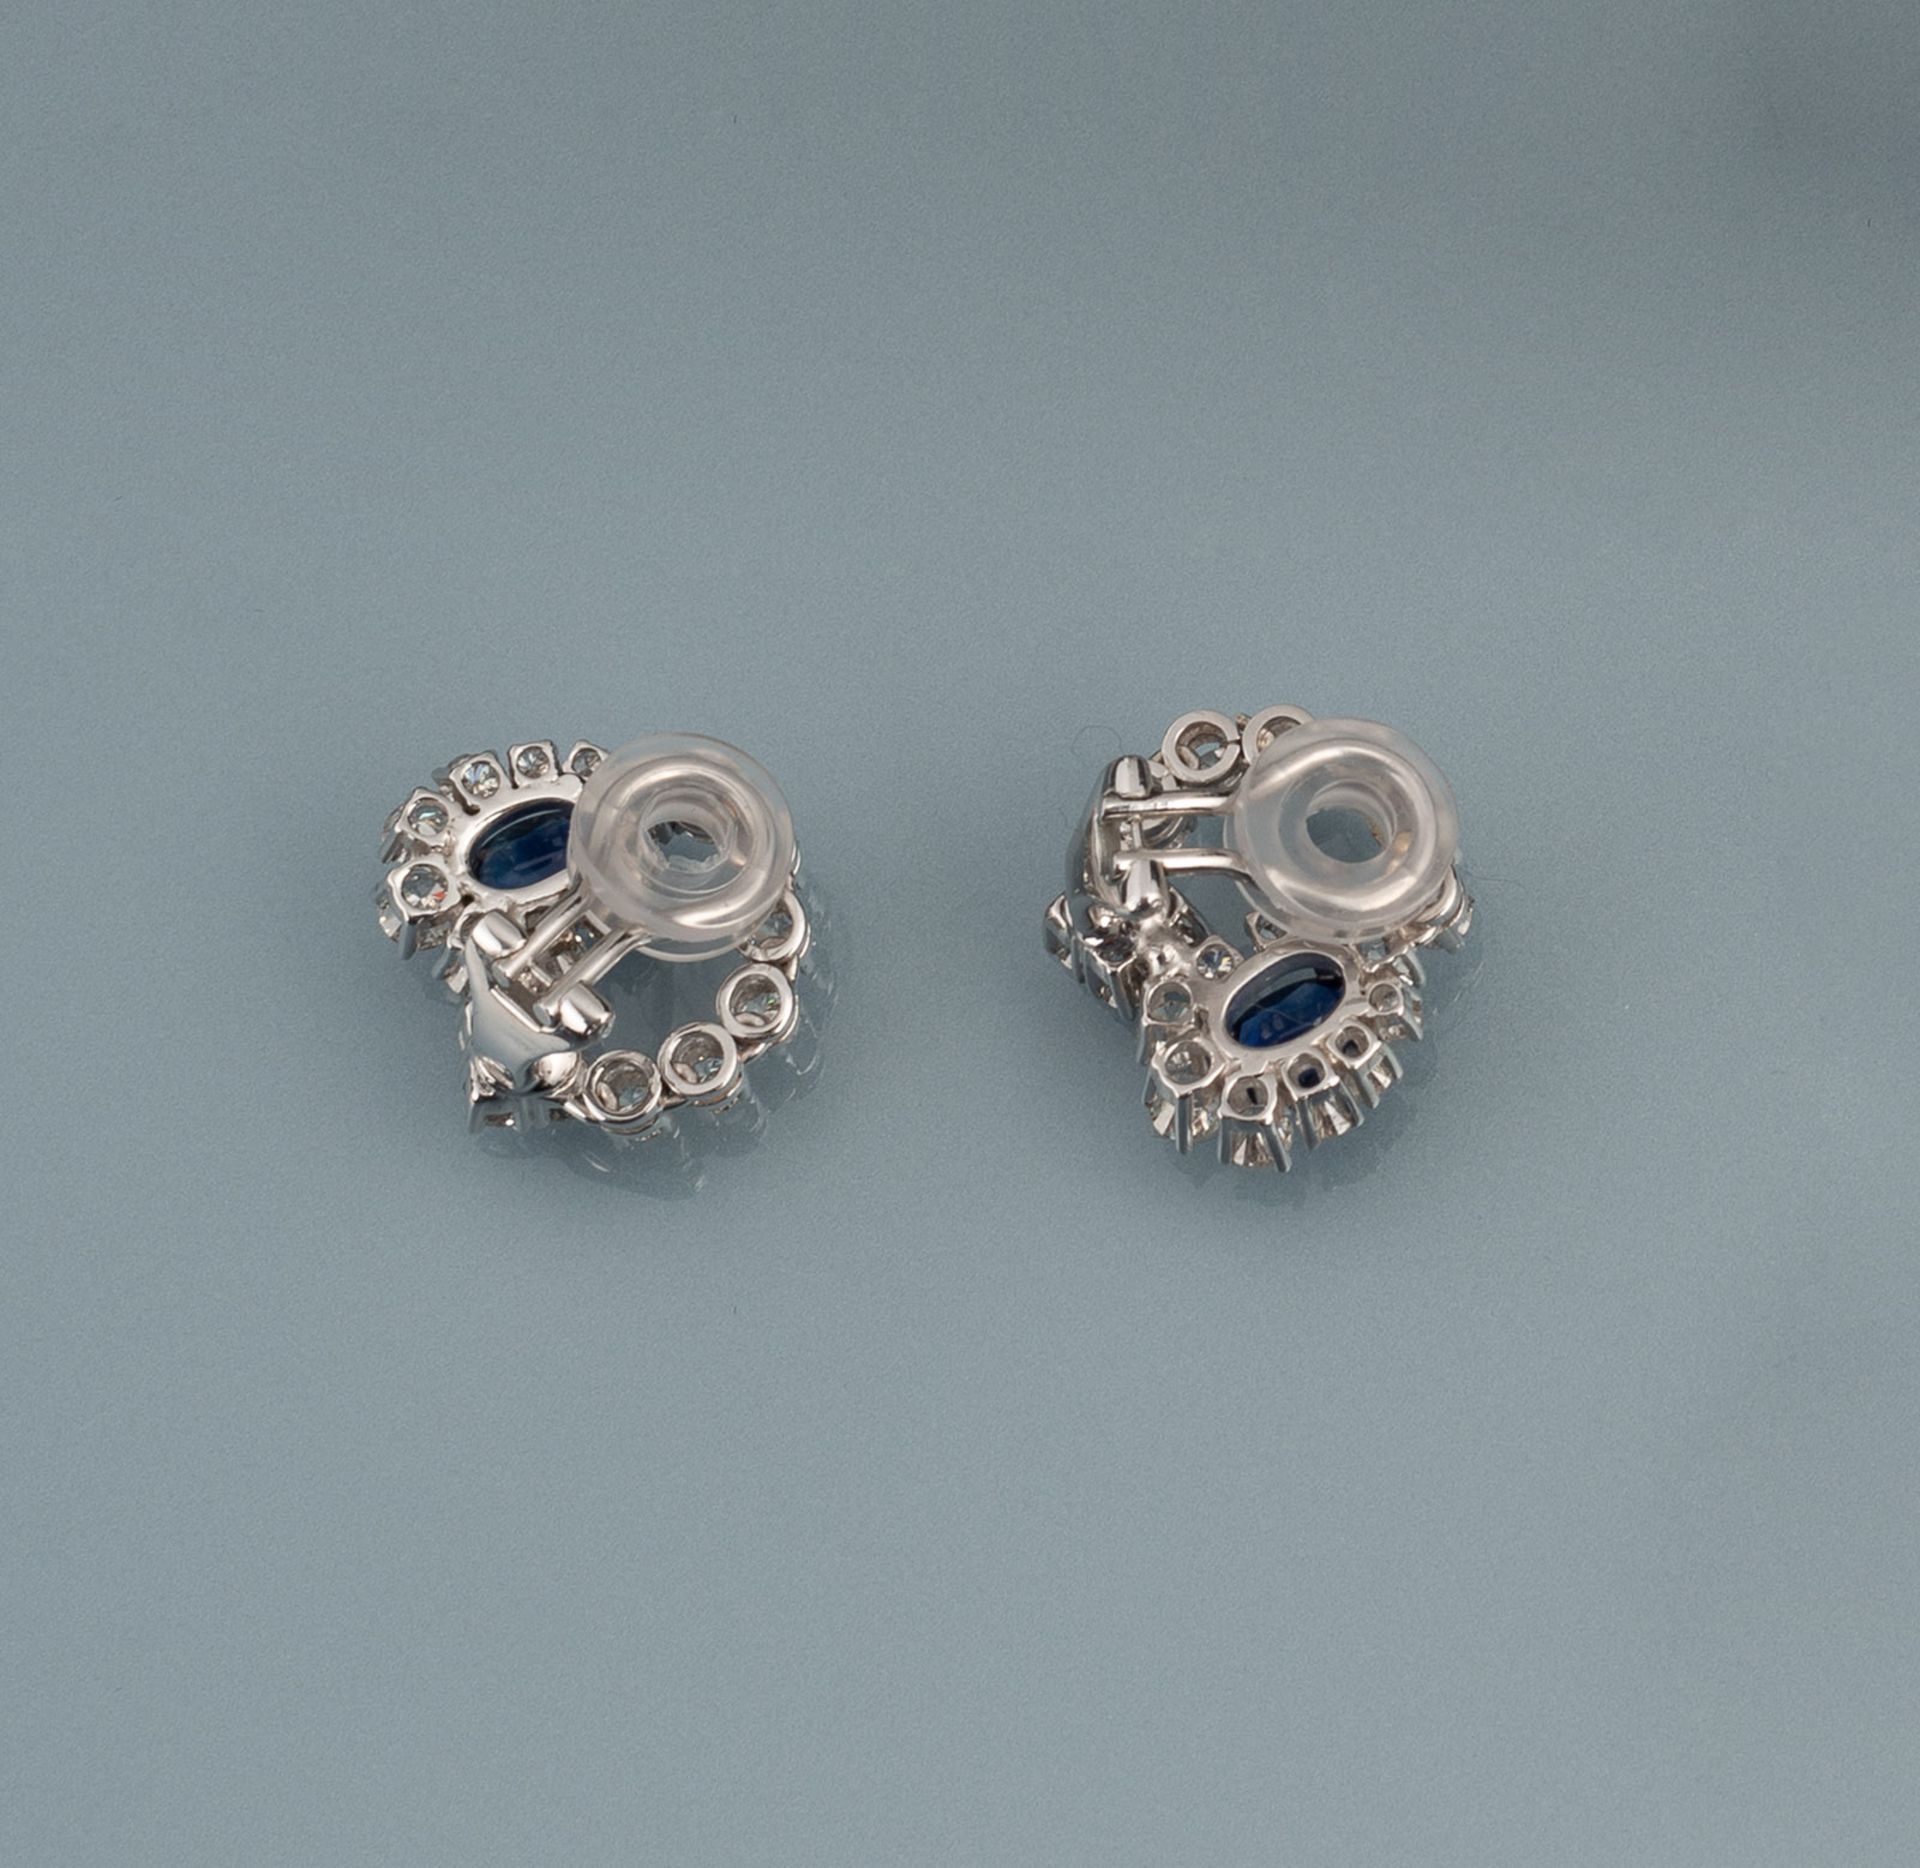 A PAIR OF SAPPHIRE AND DIAMOND EARCLIPS - Image 2 of 2